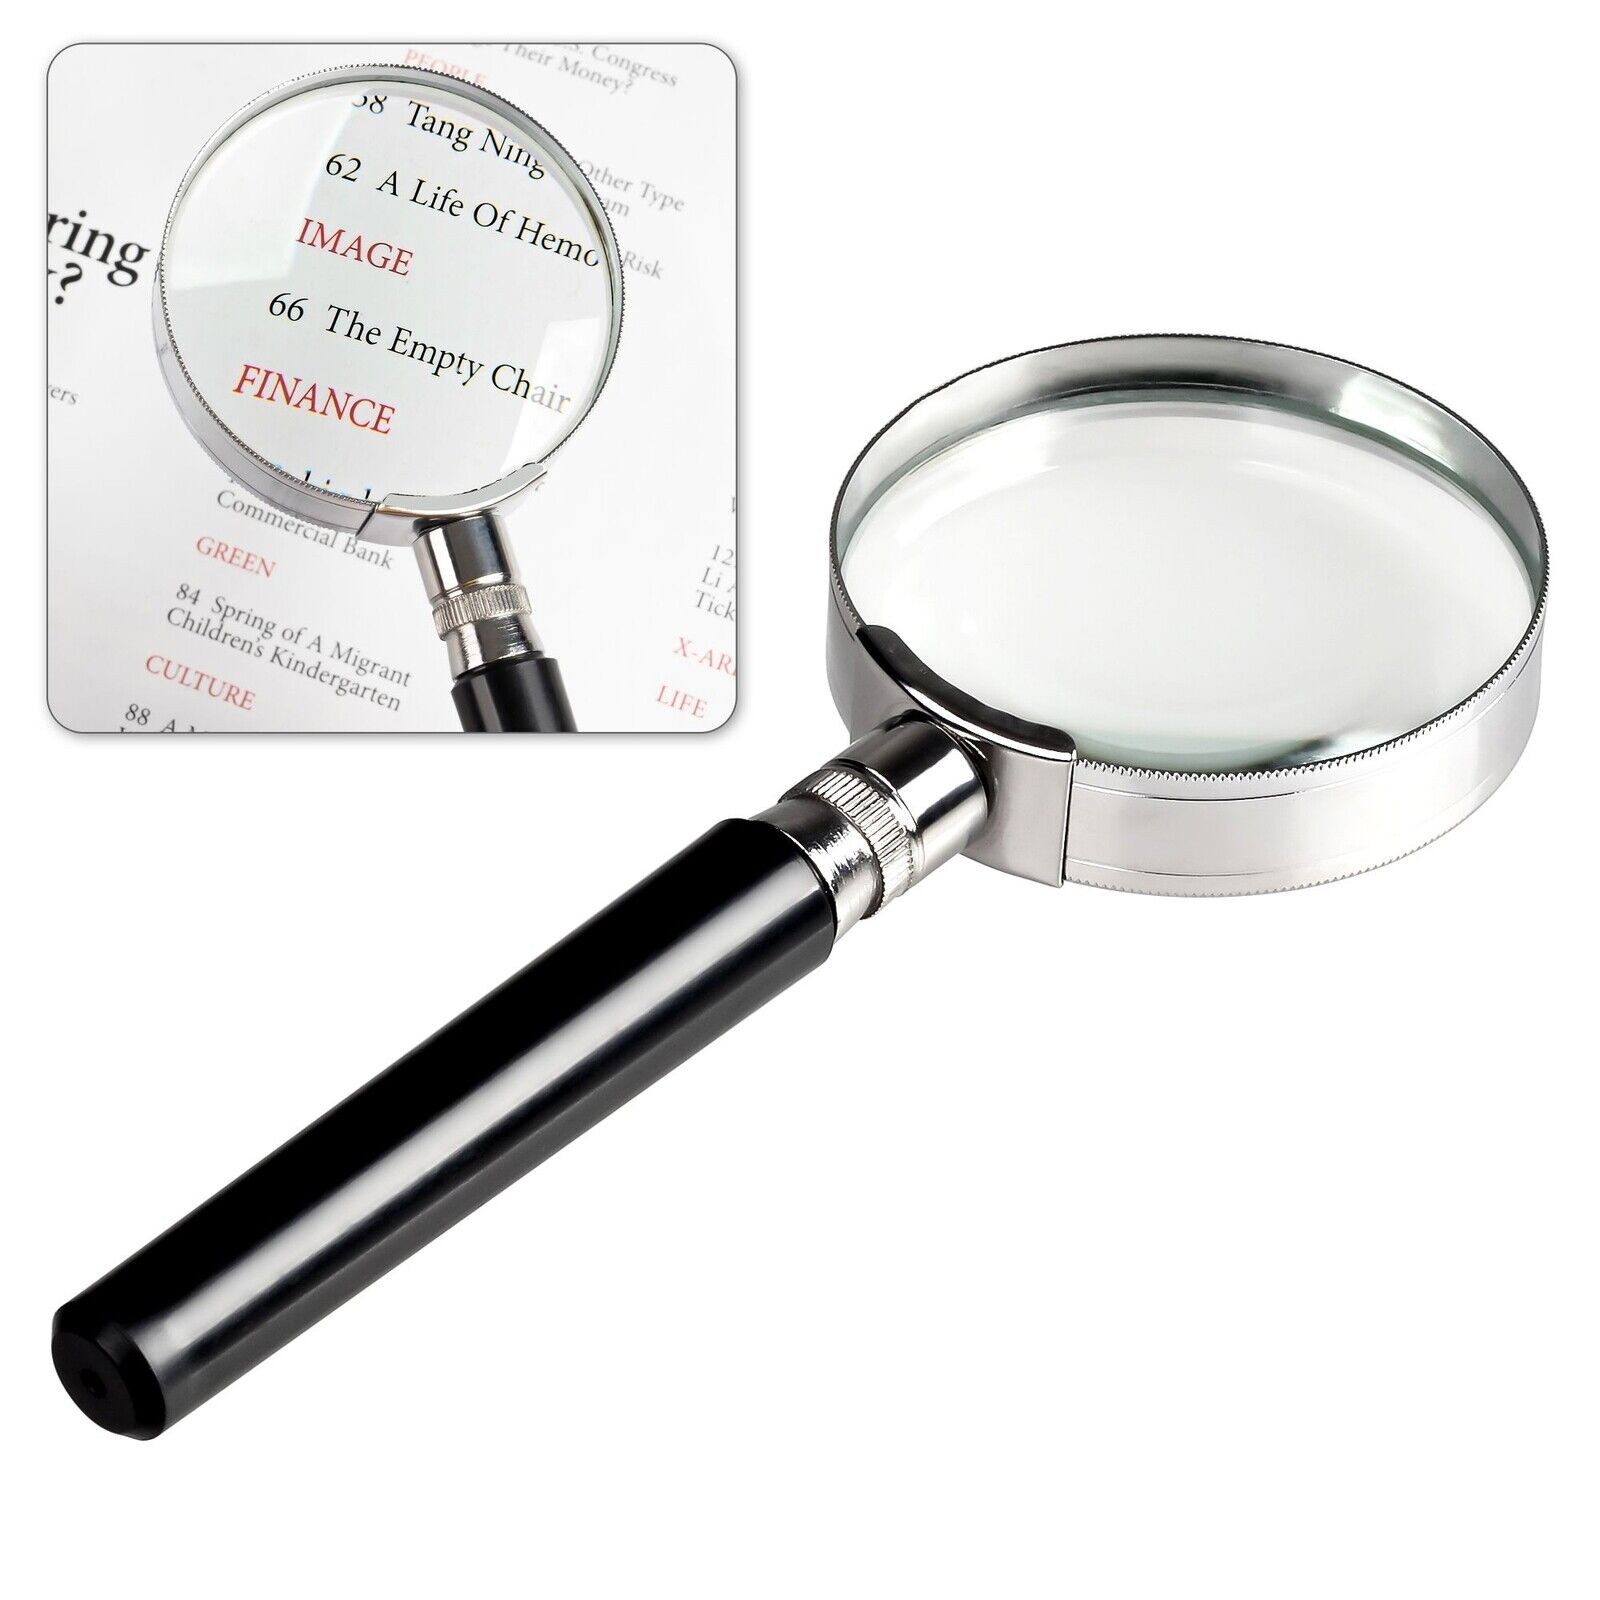 Insten 10X Magnifying Glass, 2 Inch Handheld Glass Reading Magnifier, Black